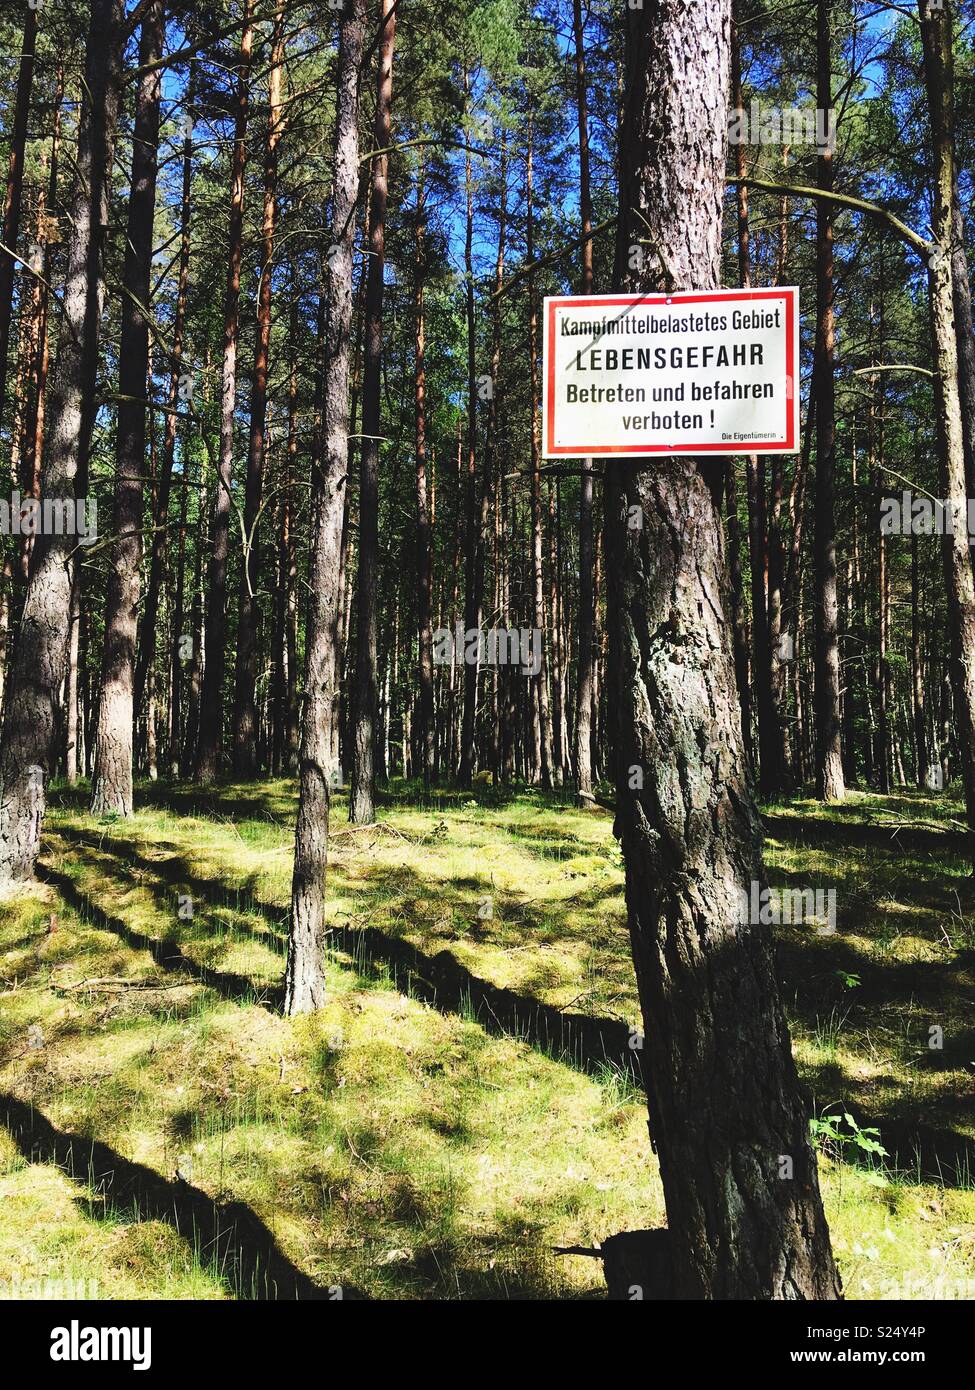 A German sign warning of entering a pine forest because of mortal danger due to contamination with ammunition or weapons left from military use under the Nazis, Mirow, Mecklenburg-Vorpommern, Germany Stock Photo